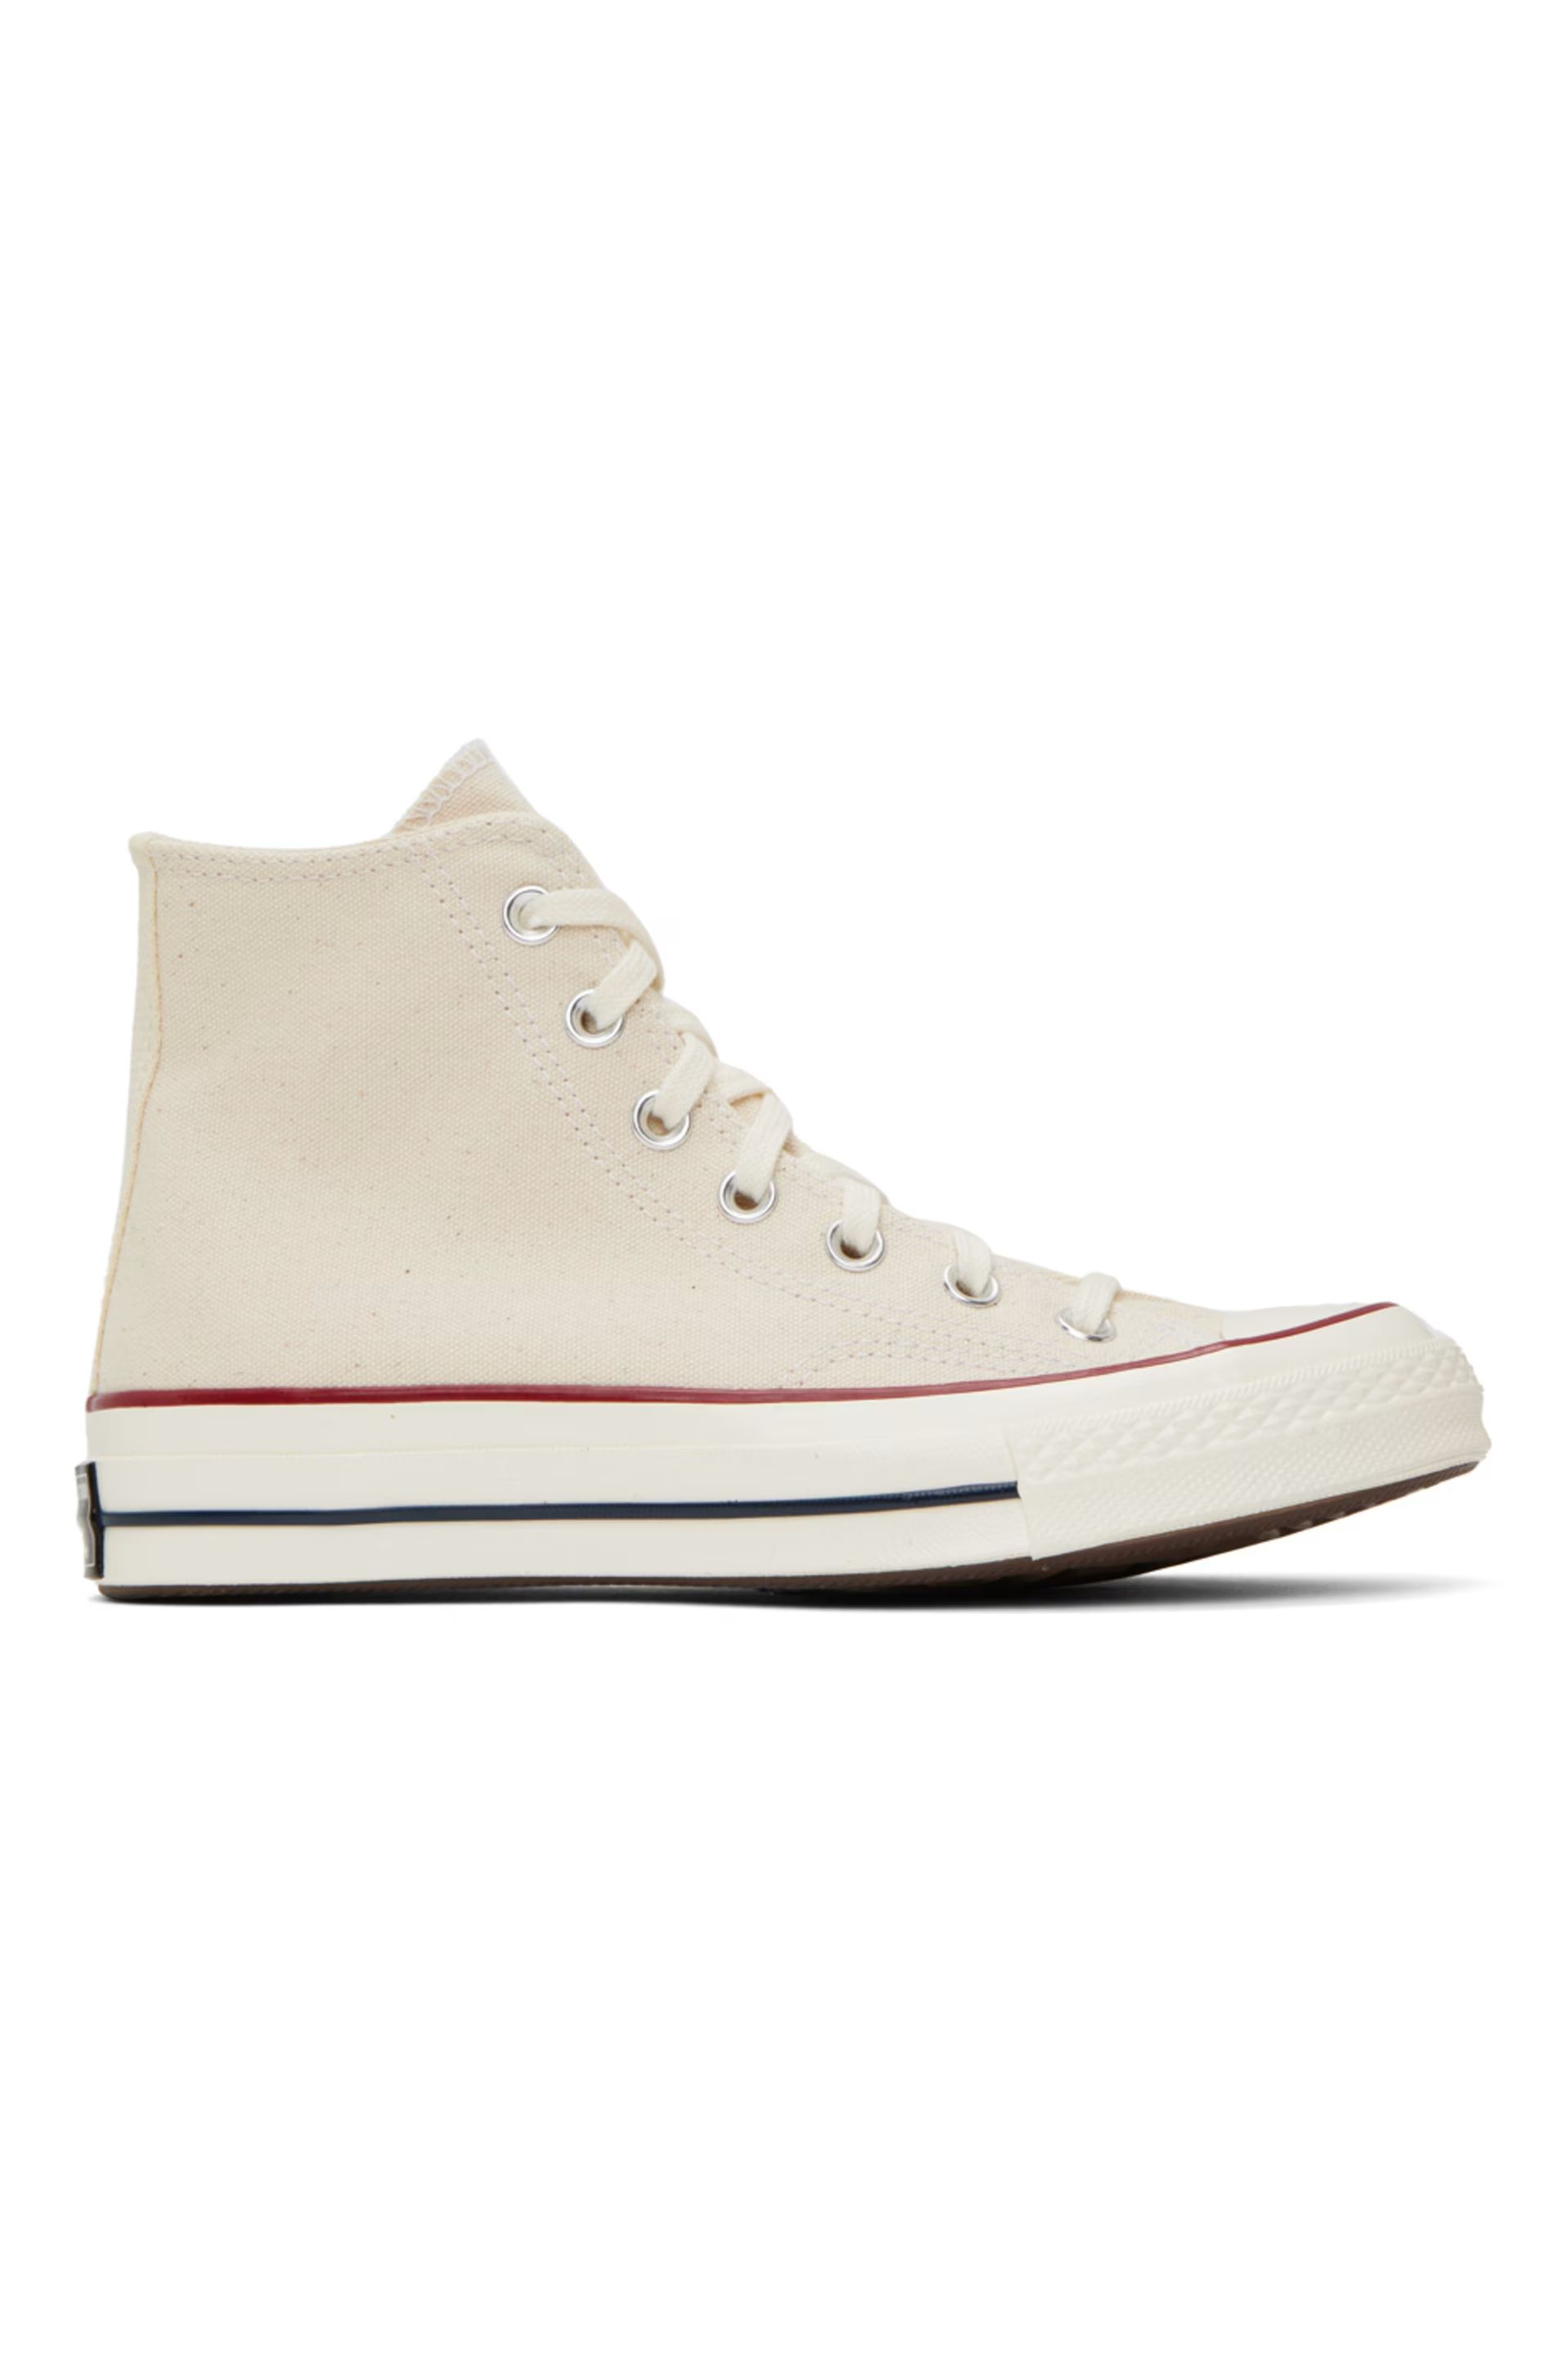 Off-White Chuck 70 High Top Sneakers | SSENSE